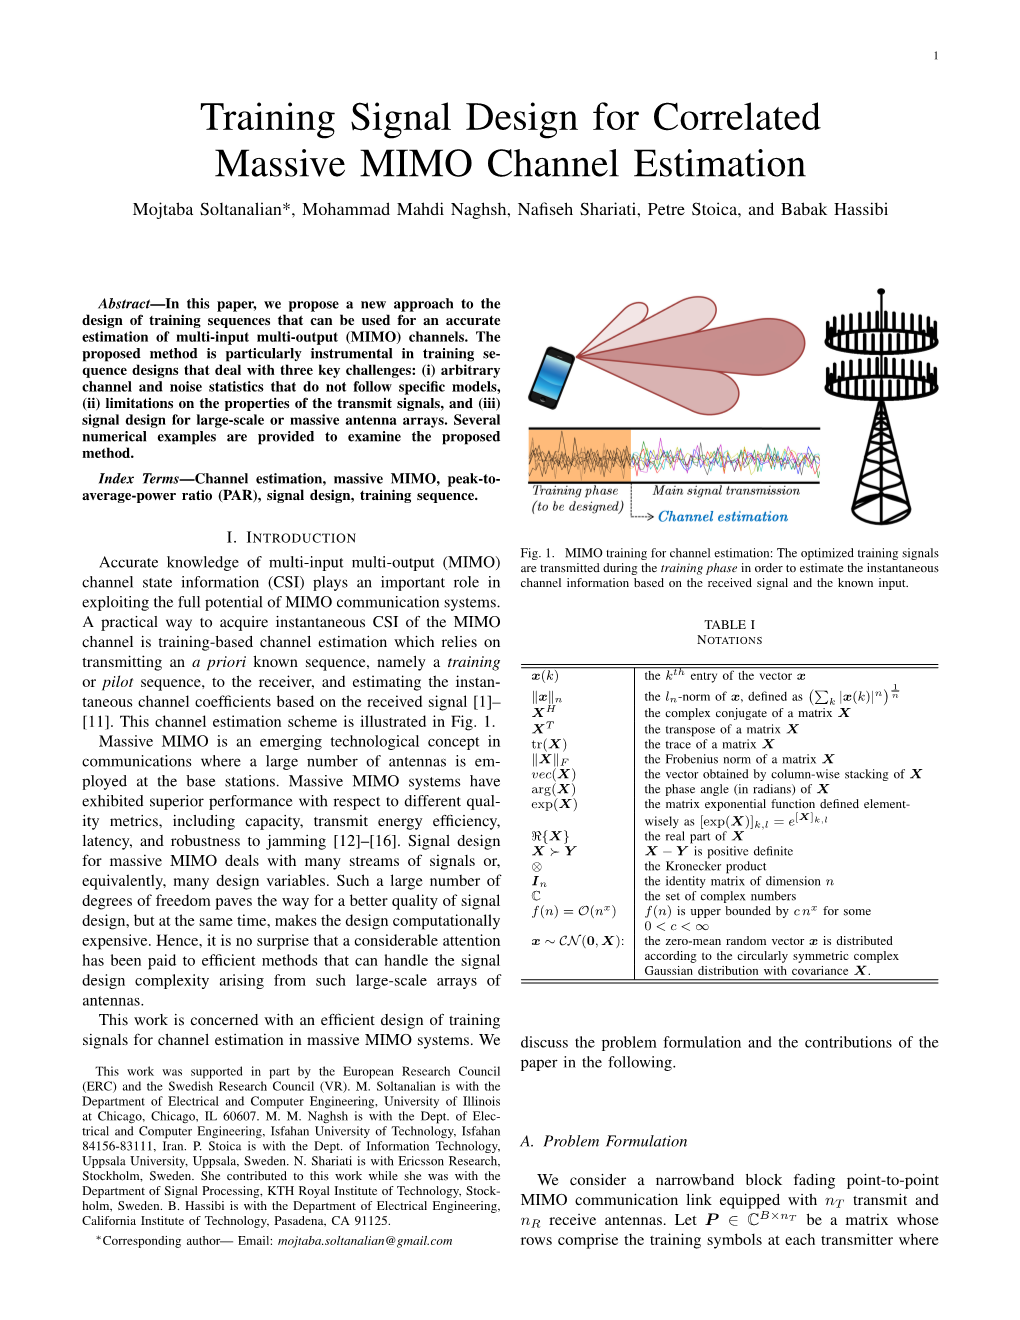 Training Signal Design for Correlated Massive MIMO Channel Estimation Mojtaba Soltanalian*, Mohammad Mahdi Naghsh, Naﬁseh Shariati, Petre Stoica, and Babak Hassibi